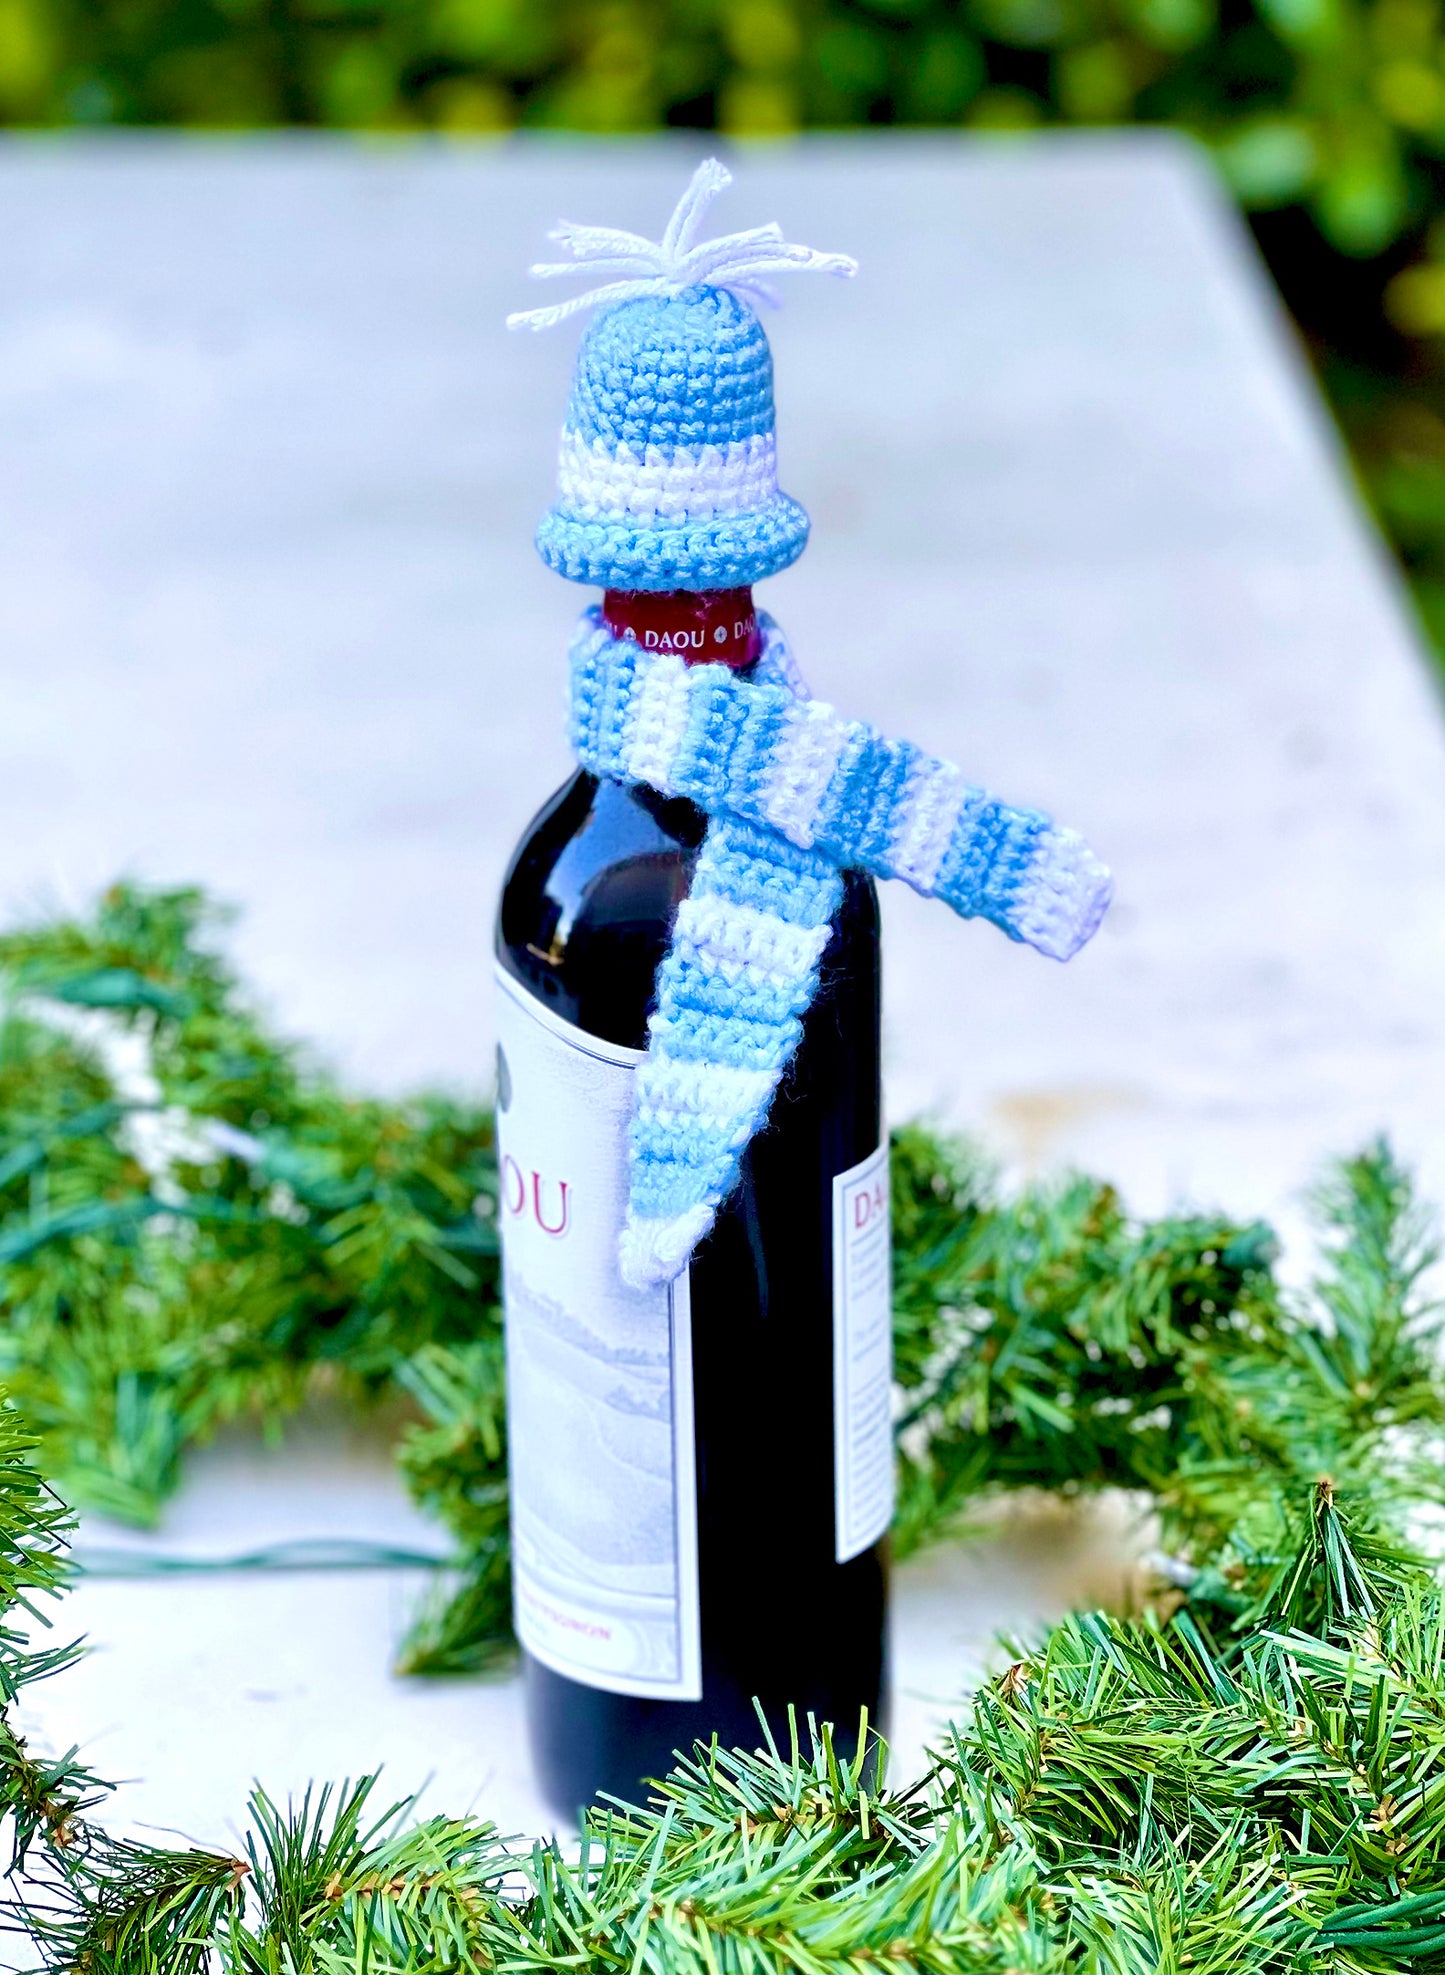 These knitted wine bottle topper hat & scarf sets make gift giving more fun. Made from upcycled acrylic yarn in three different festive styles. Made to order, please allow 3 to 7 days depending how many sets are ordered. Colors may also vary depending on availability. Acrylic yarn Hand wash cold, line dry Handmade in California